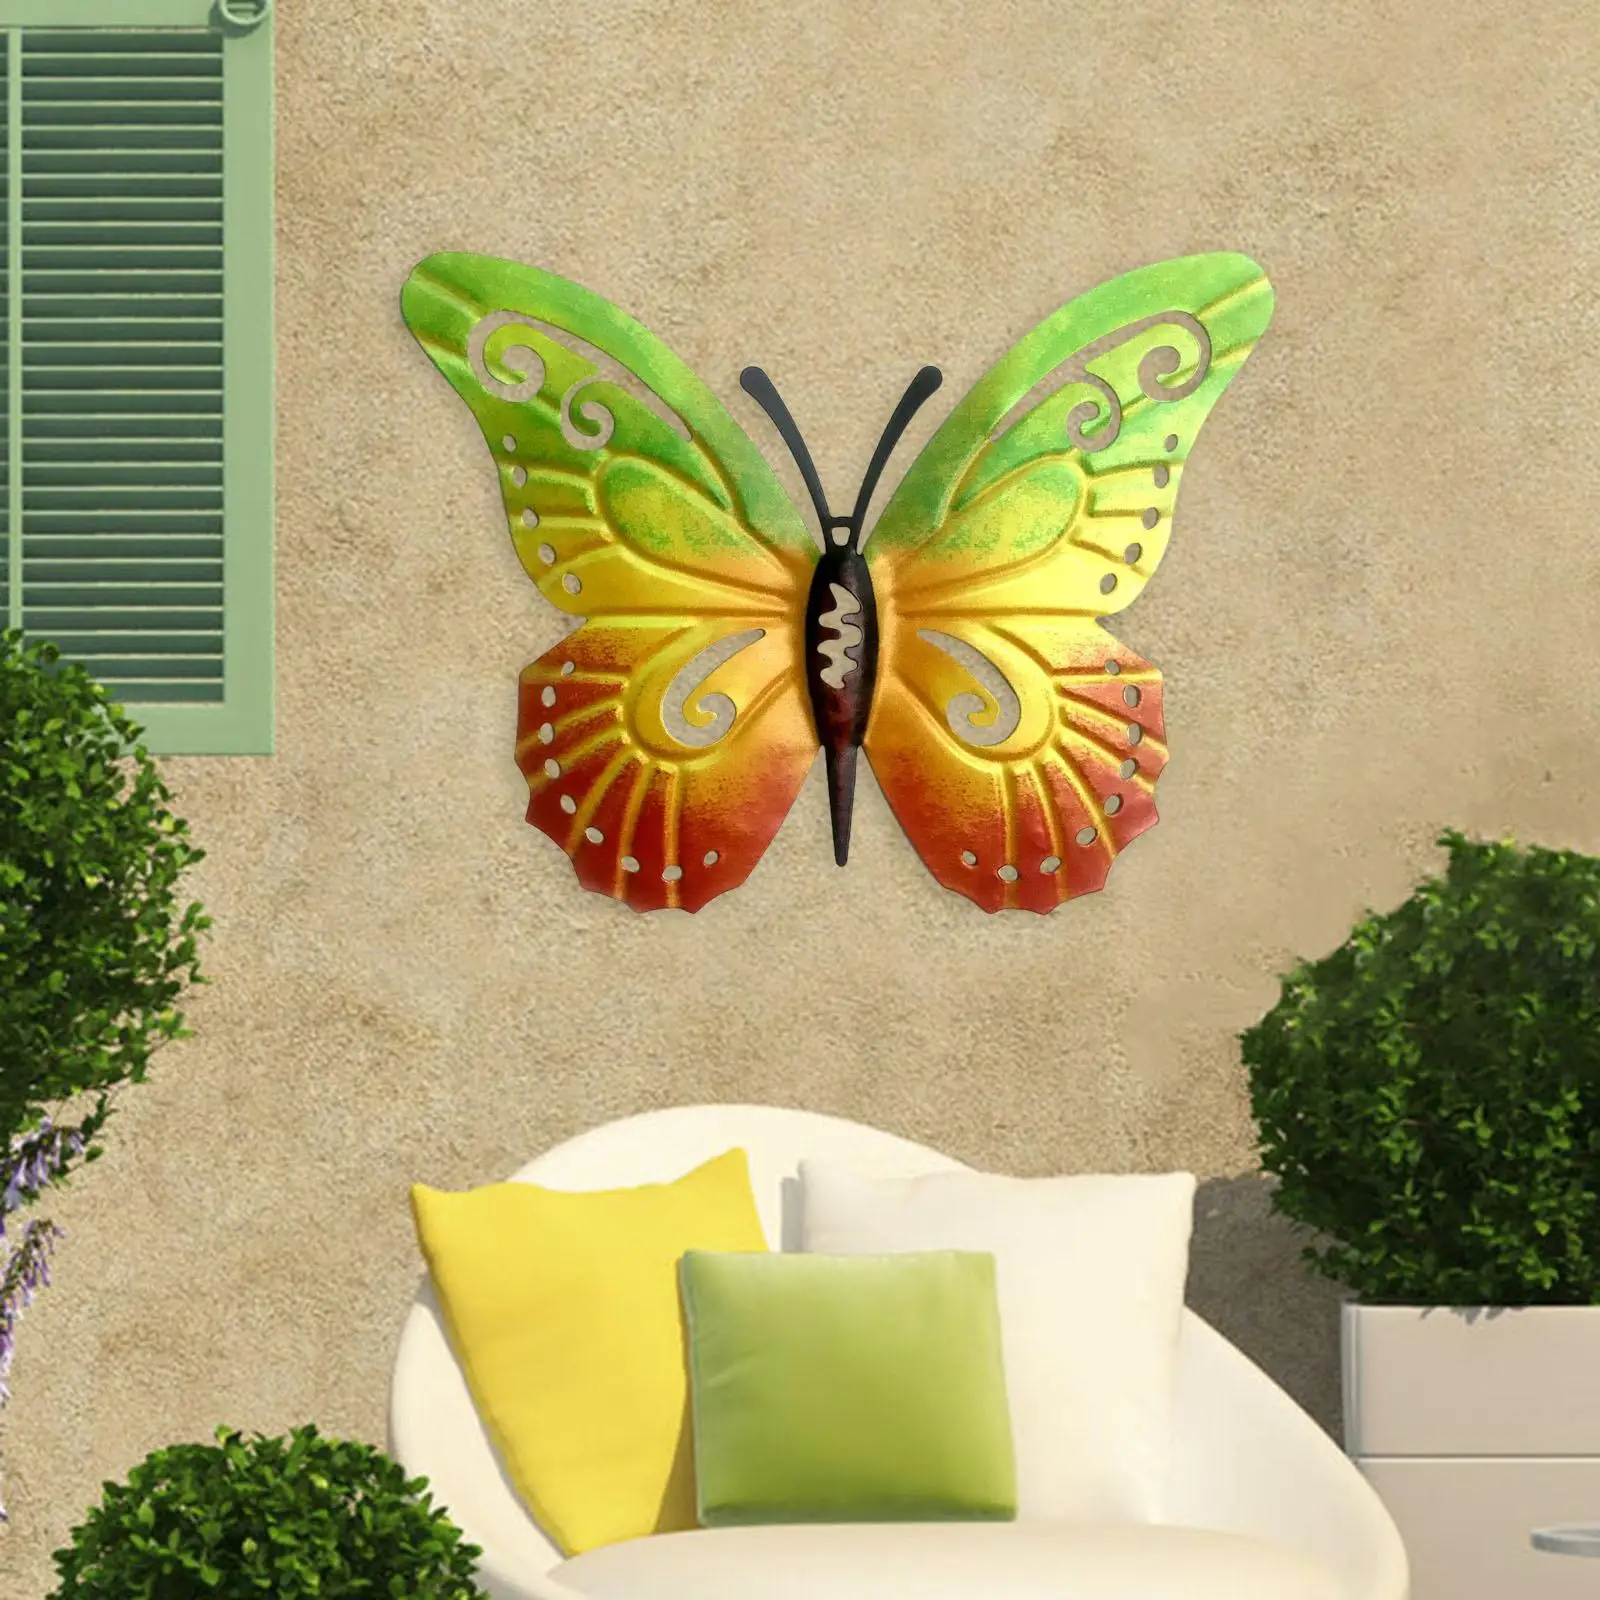 Butterfly Wall Decors Hanging Sculptures Figurines Display Artwork Decoration